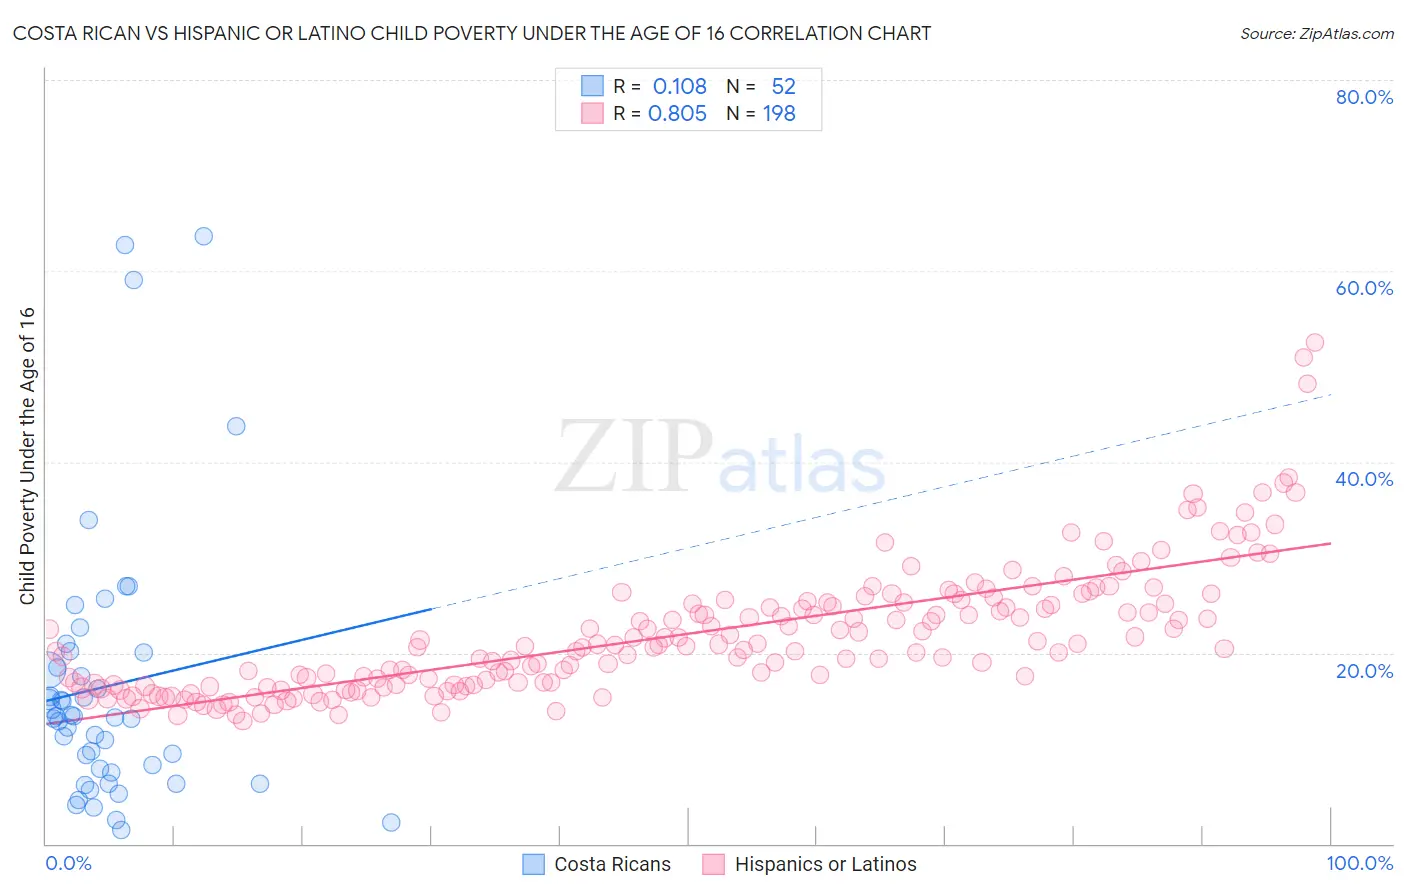 Costa Rican vs Hispanic or Latino Child Poverty Under the Age of 16